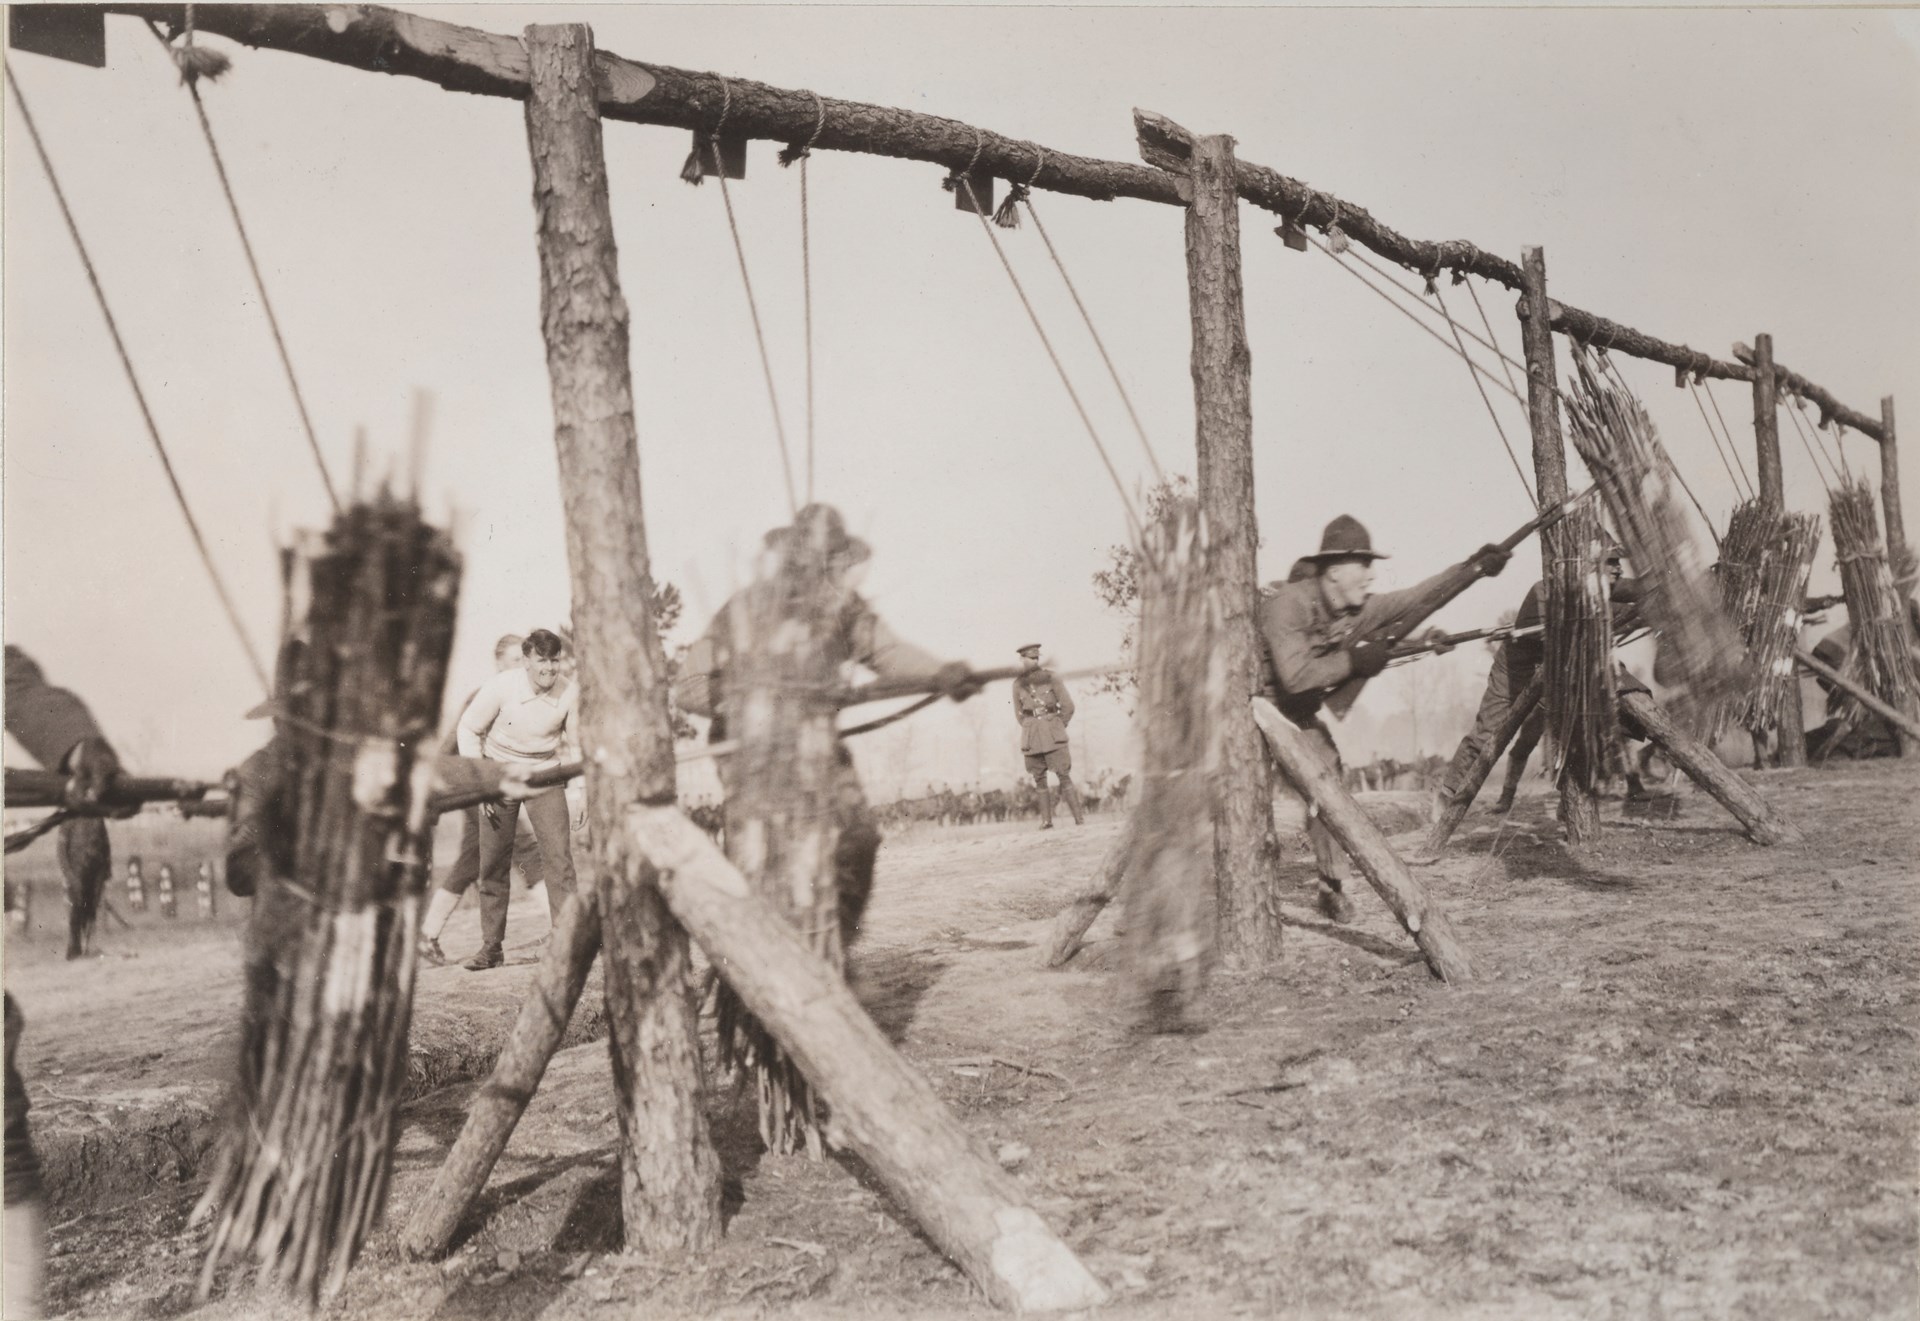 Bayonet training taking place on bundled wooden dummies, teaching the importance of both the thrust and withdrawal on a dynamic target.